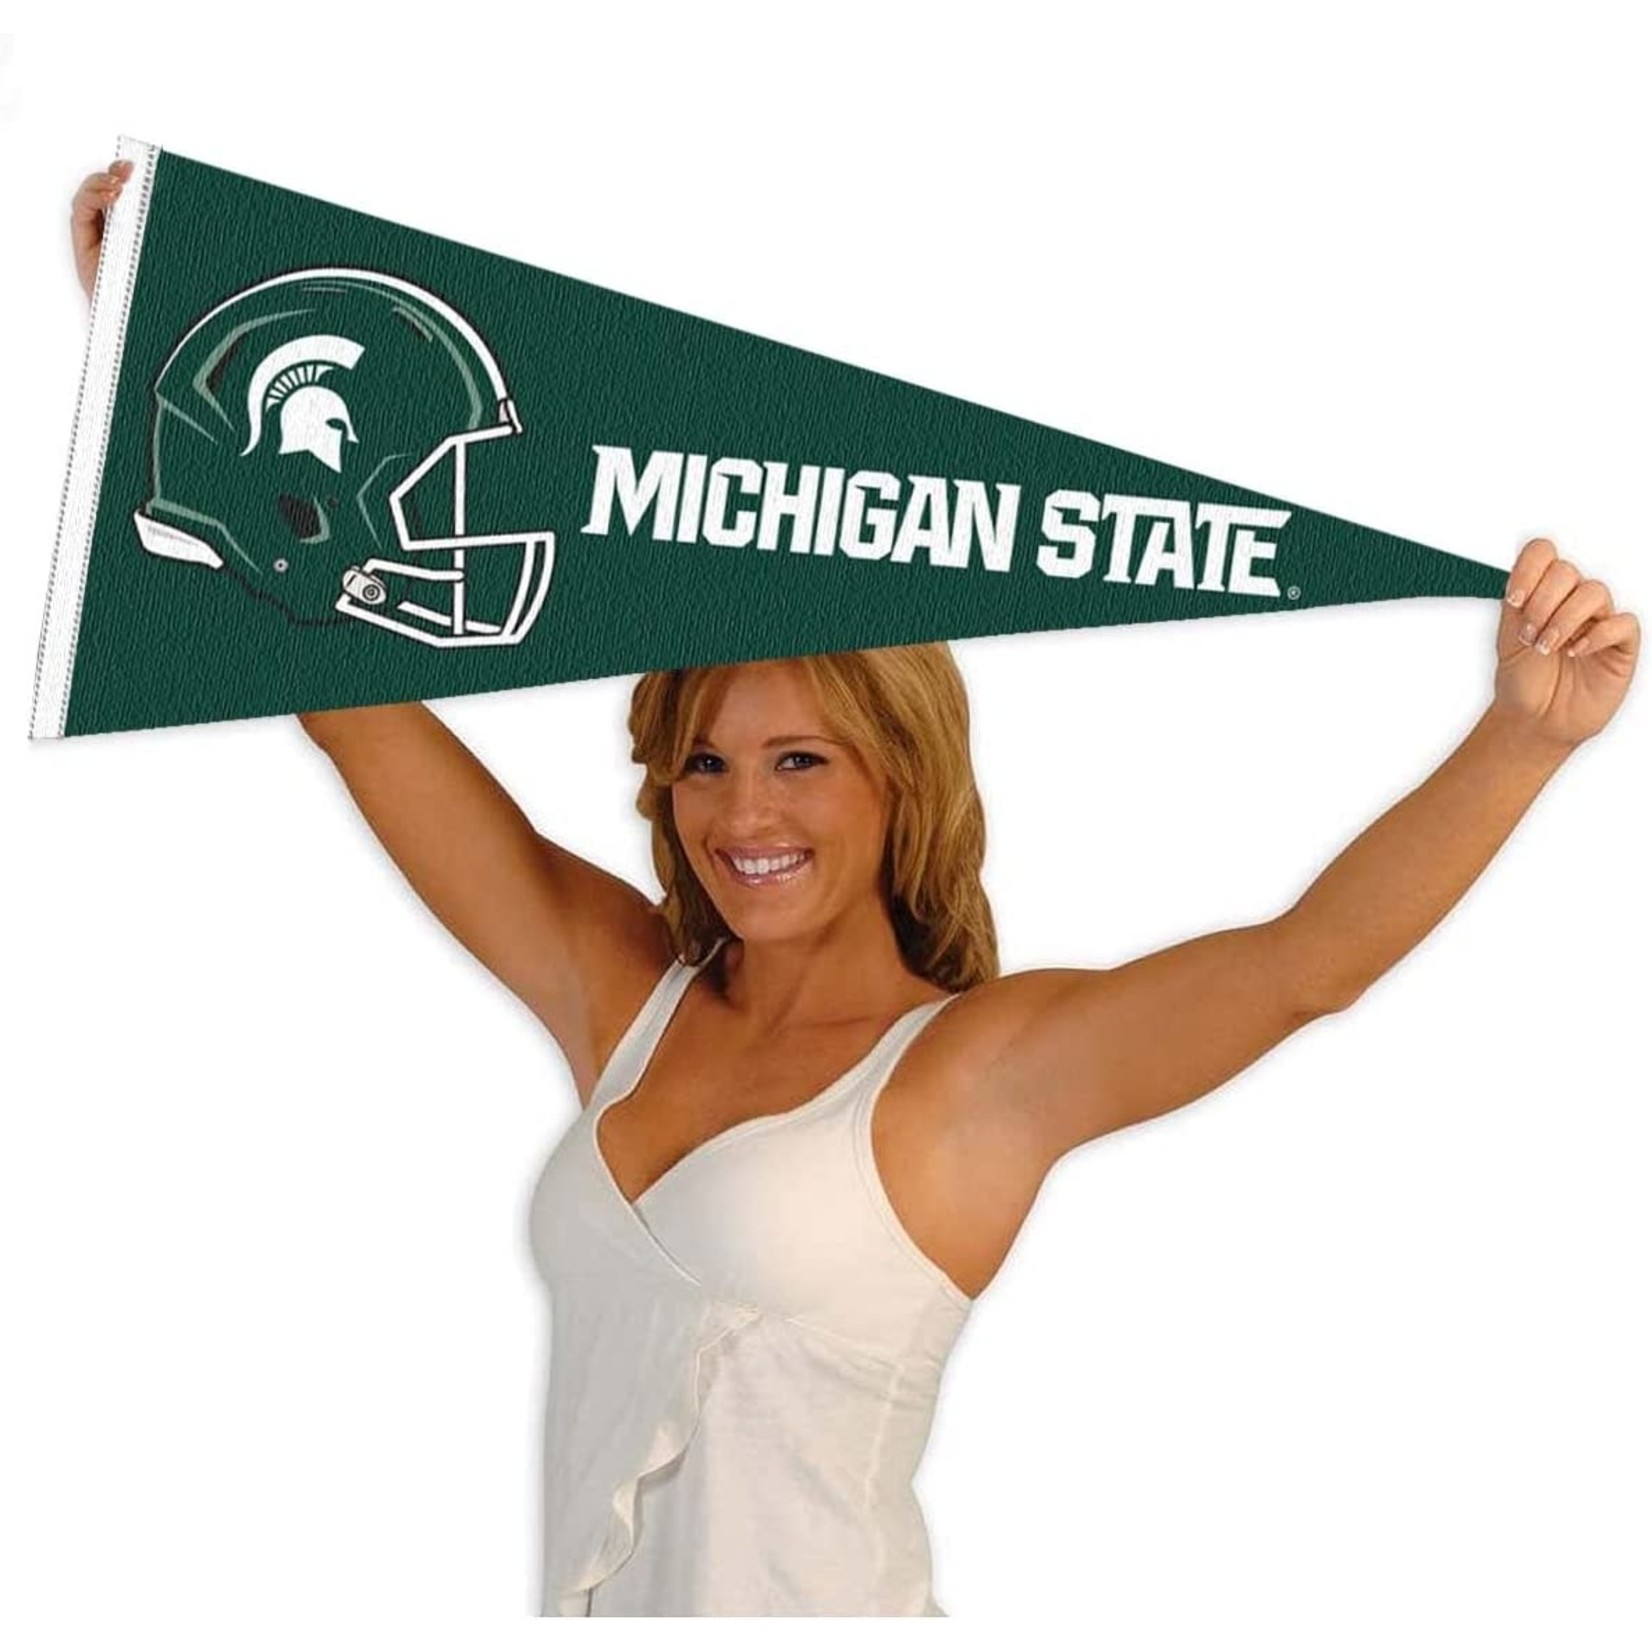 Sewing Concepts NCAA Michigan State Spartans Football Helmet Pennant 12''x30''